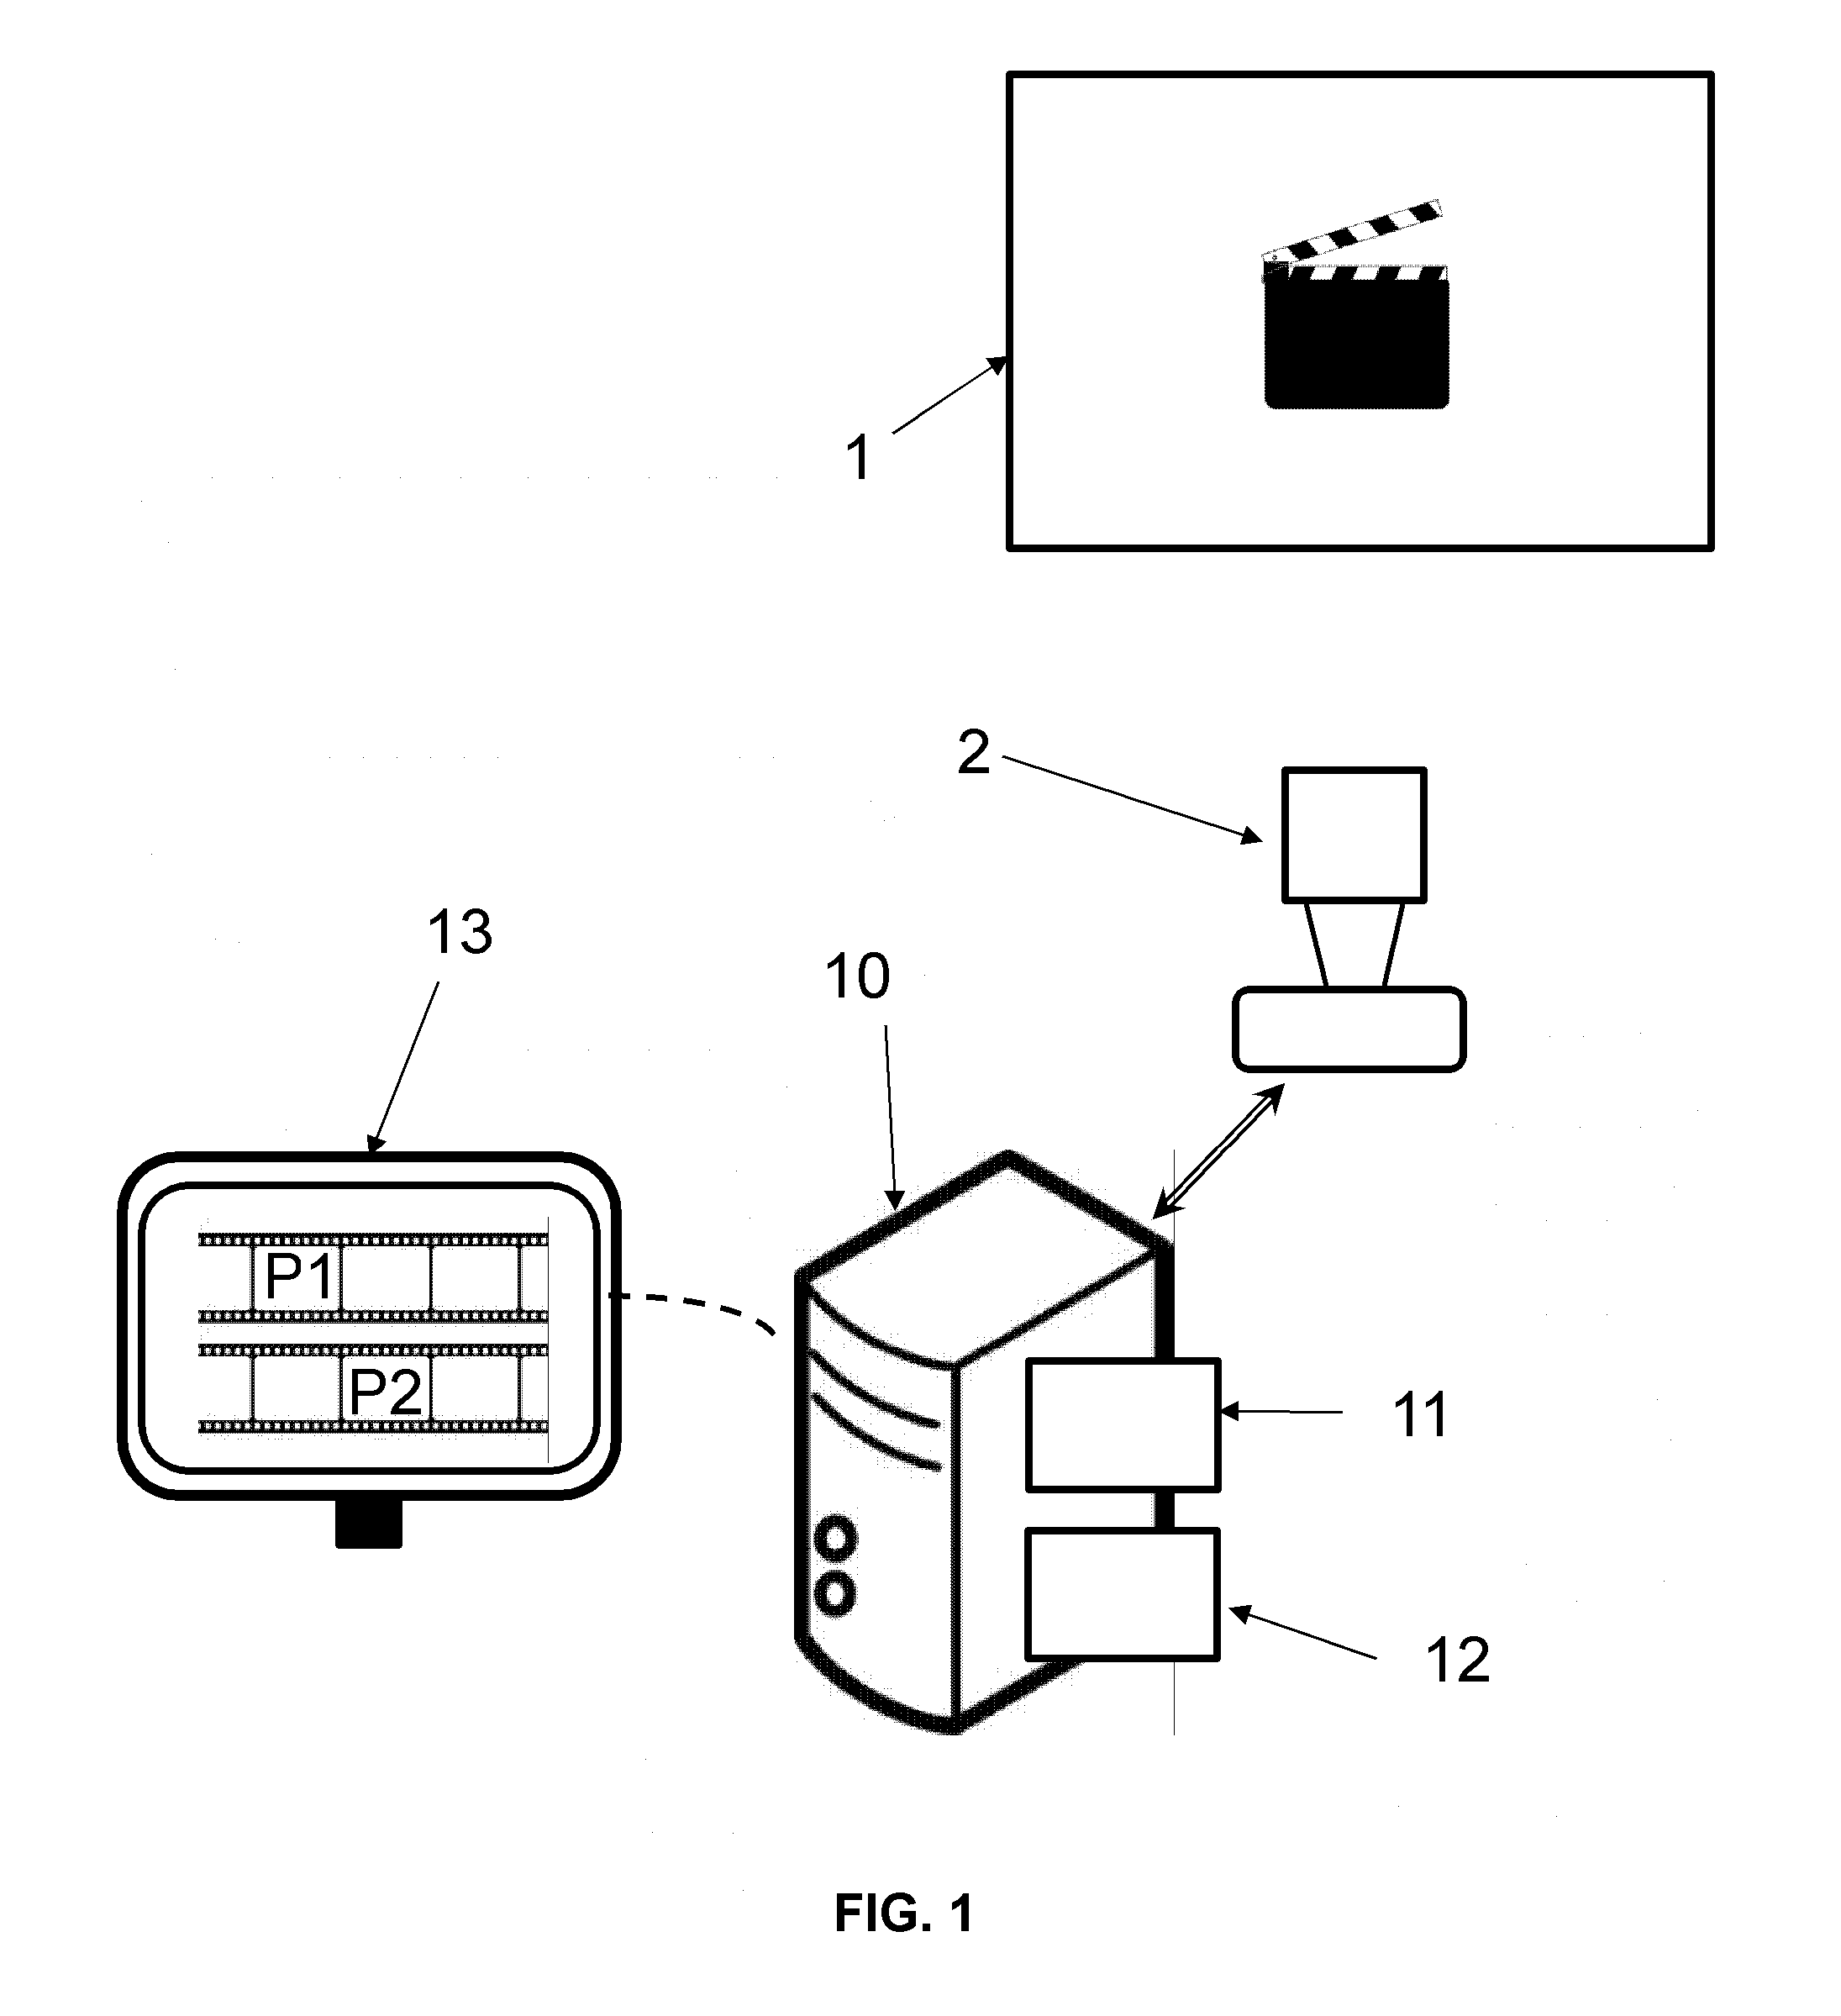 Method for generating a cyclic video sequence